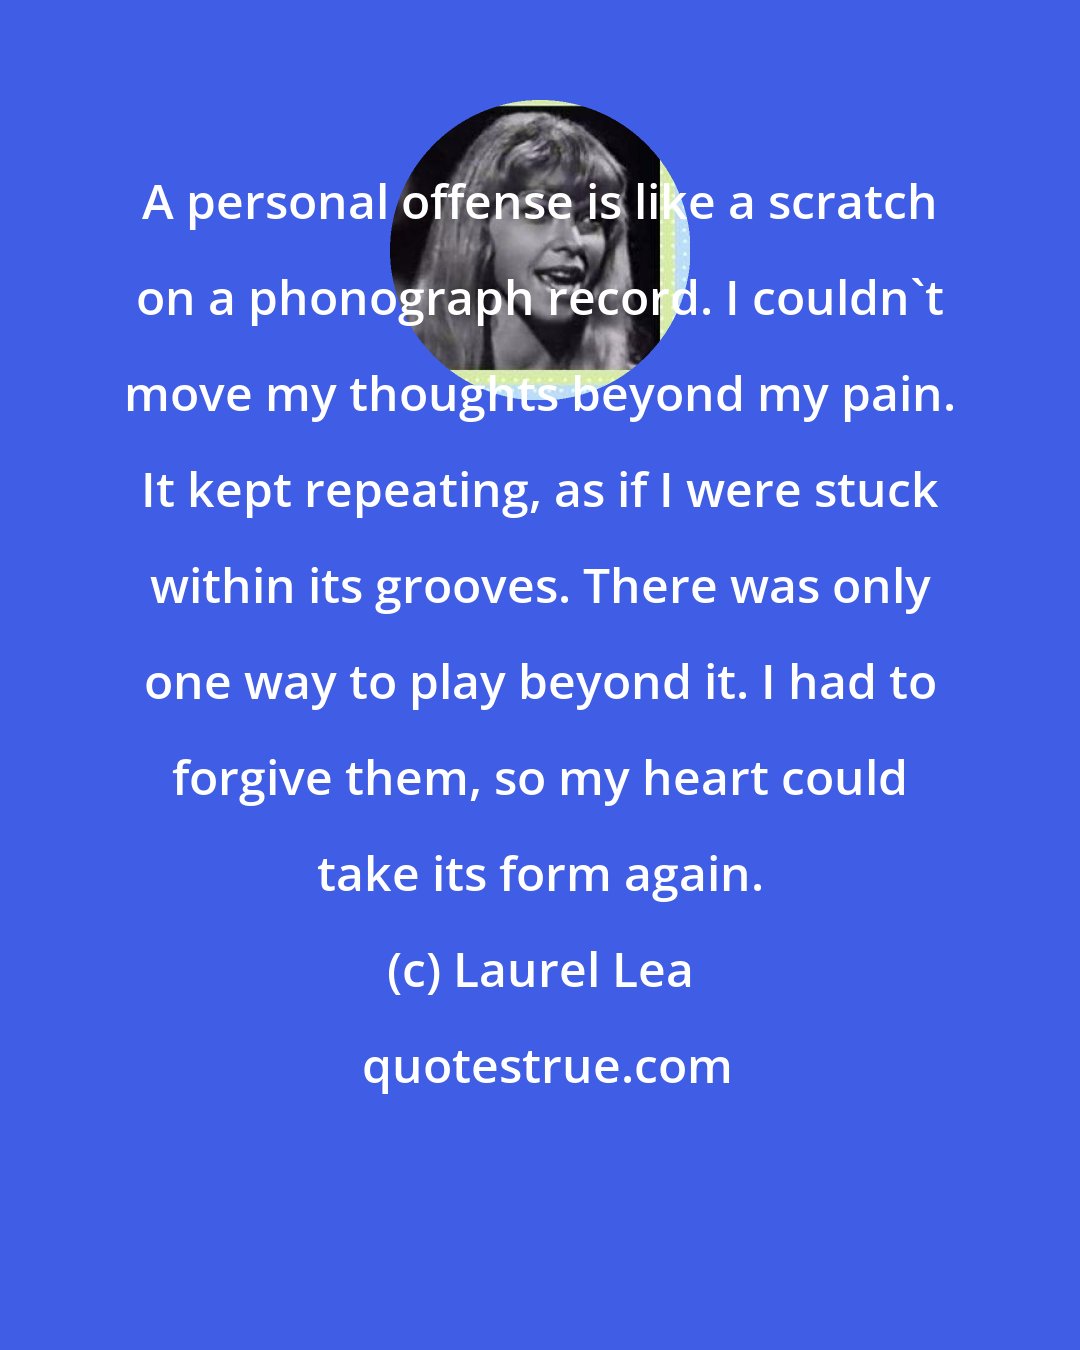 Laurel Lea: A personal offense is like a scratch on a phonograph record. I couldn't move my thoughts beyond my pain. It kept repeating, as if I were stuck within its grooves. There was only one way to play beyond it. I had to forgive them, so my heart could take its form again.